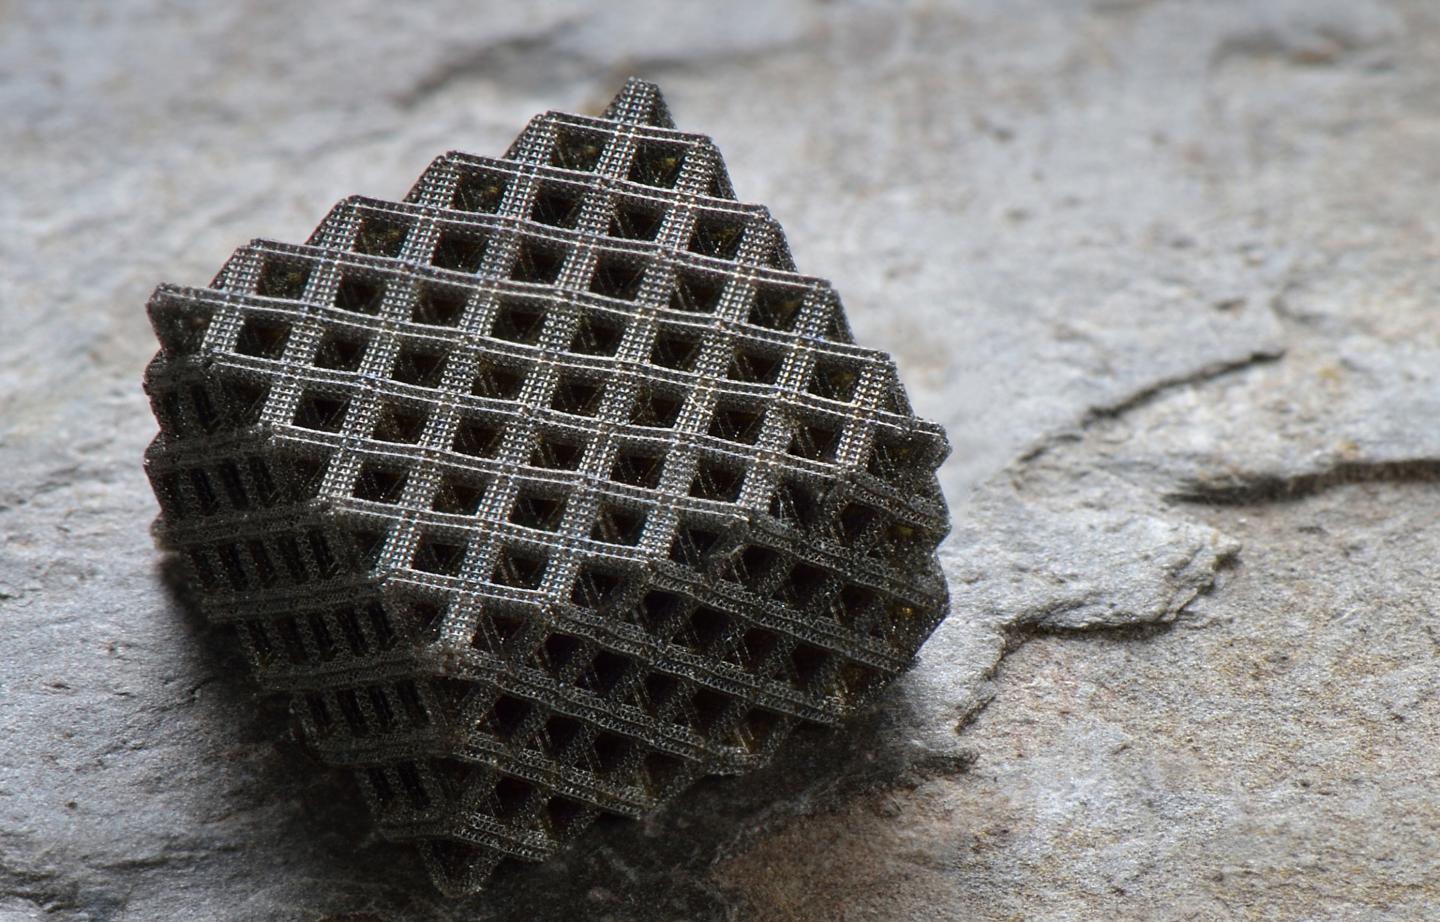 This photo shows an example of the hierarchical metallic metamaterials produced by a novel 3D printing process; these metamaterials possess multi-layered, fractal-like 3D architectures that incorporate nanoscale features. Photo: Jim Stroup/Virginia Tech.